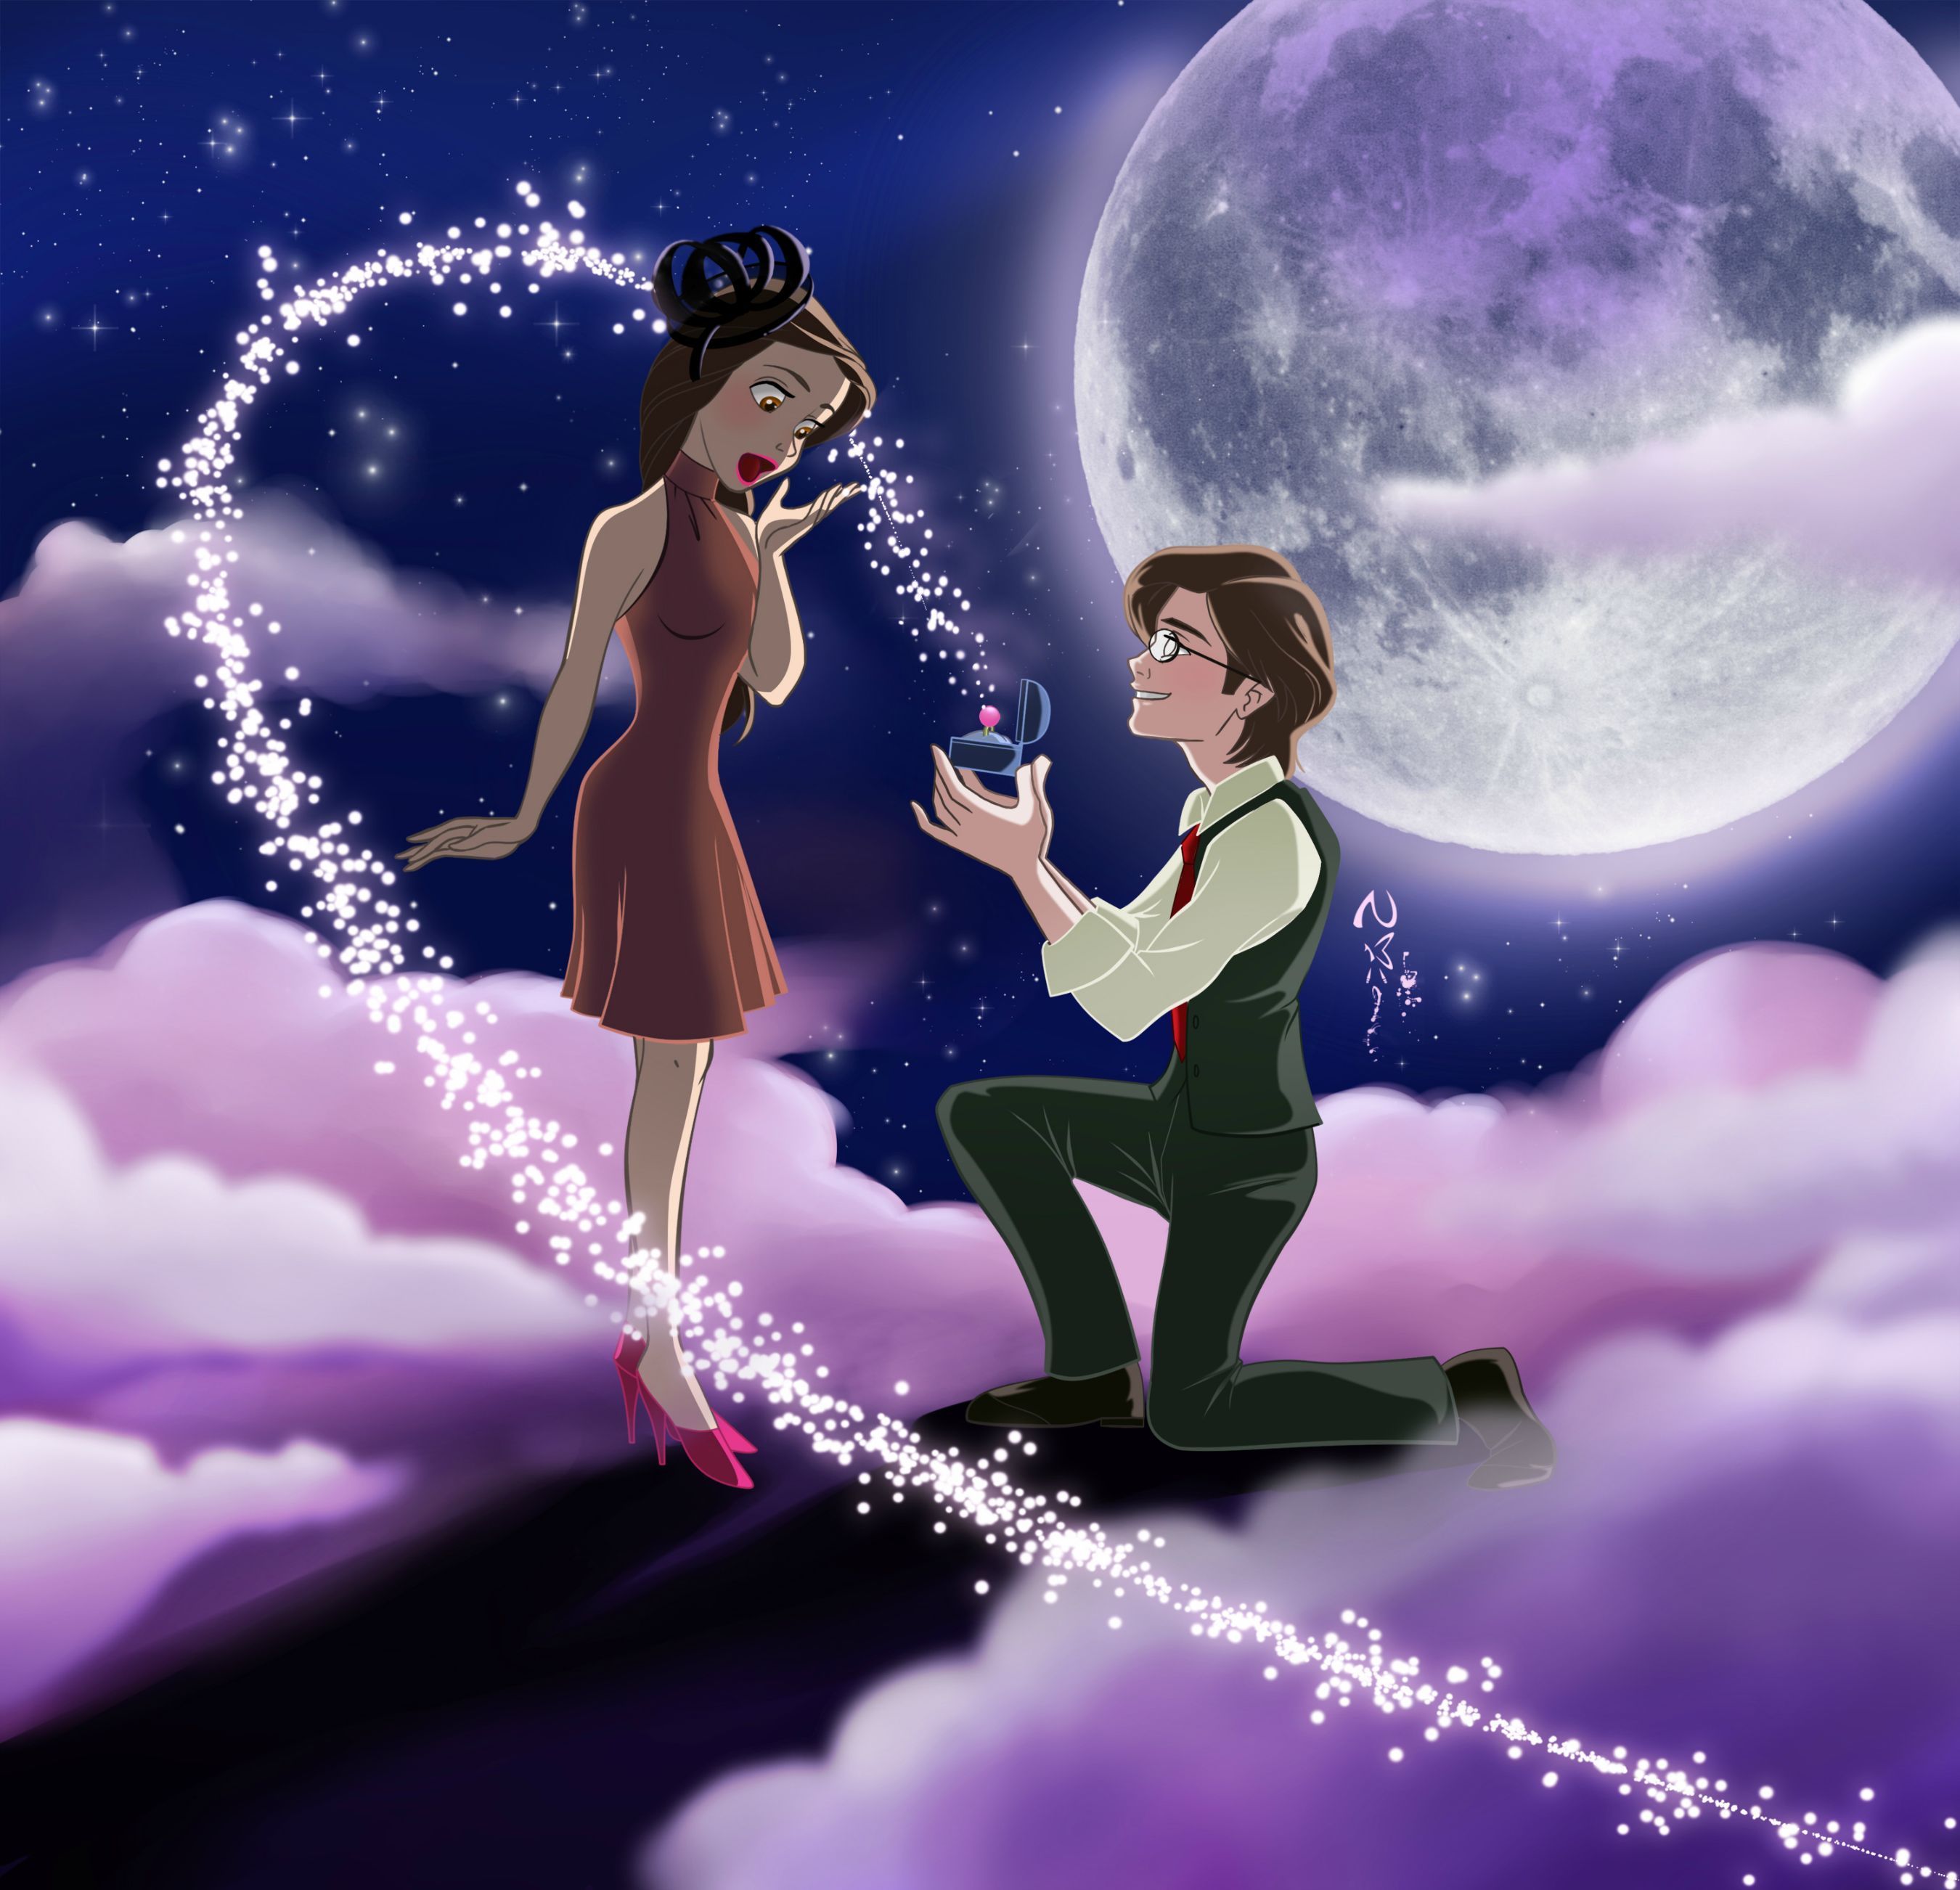 Will you marry me?. Propose day wallpaper, Propose day photo, Propose day